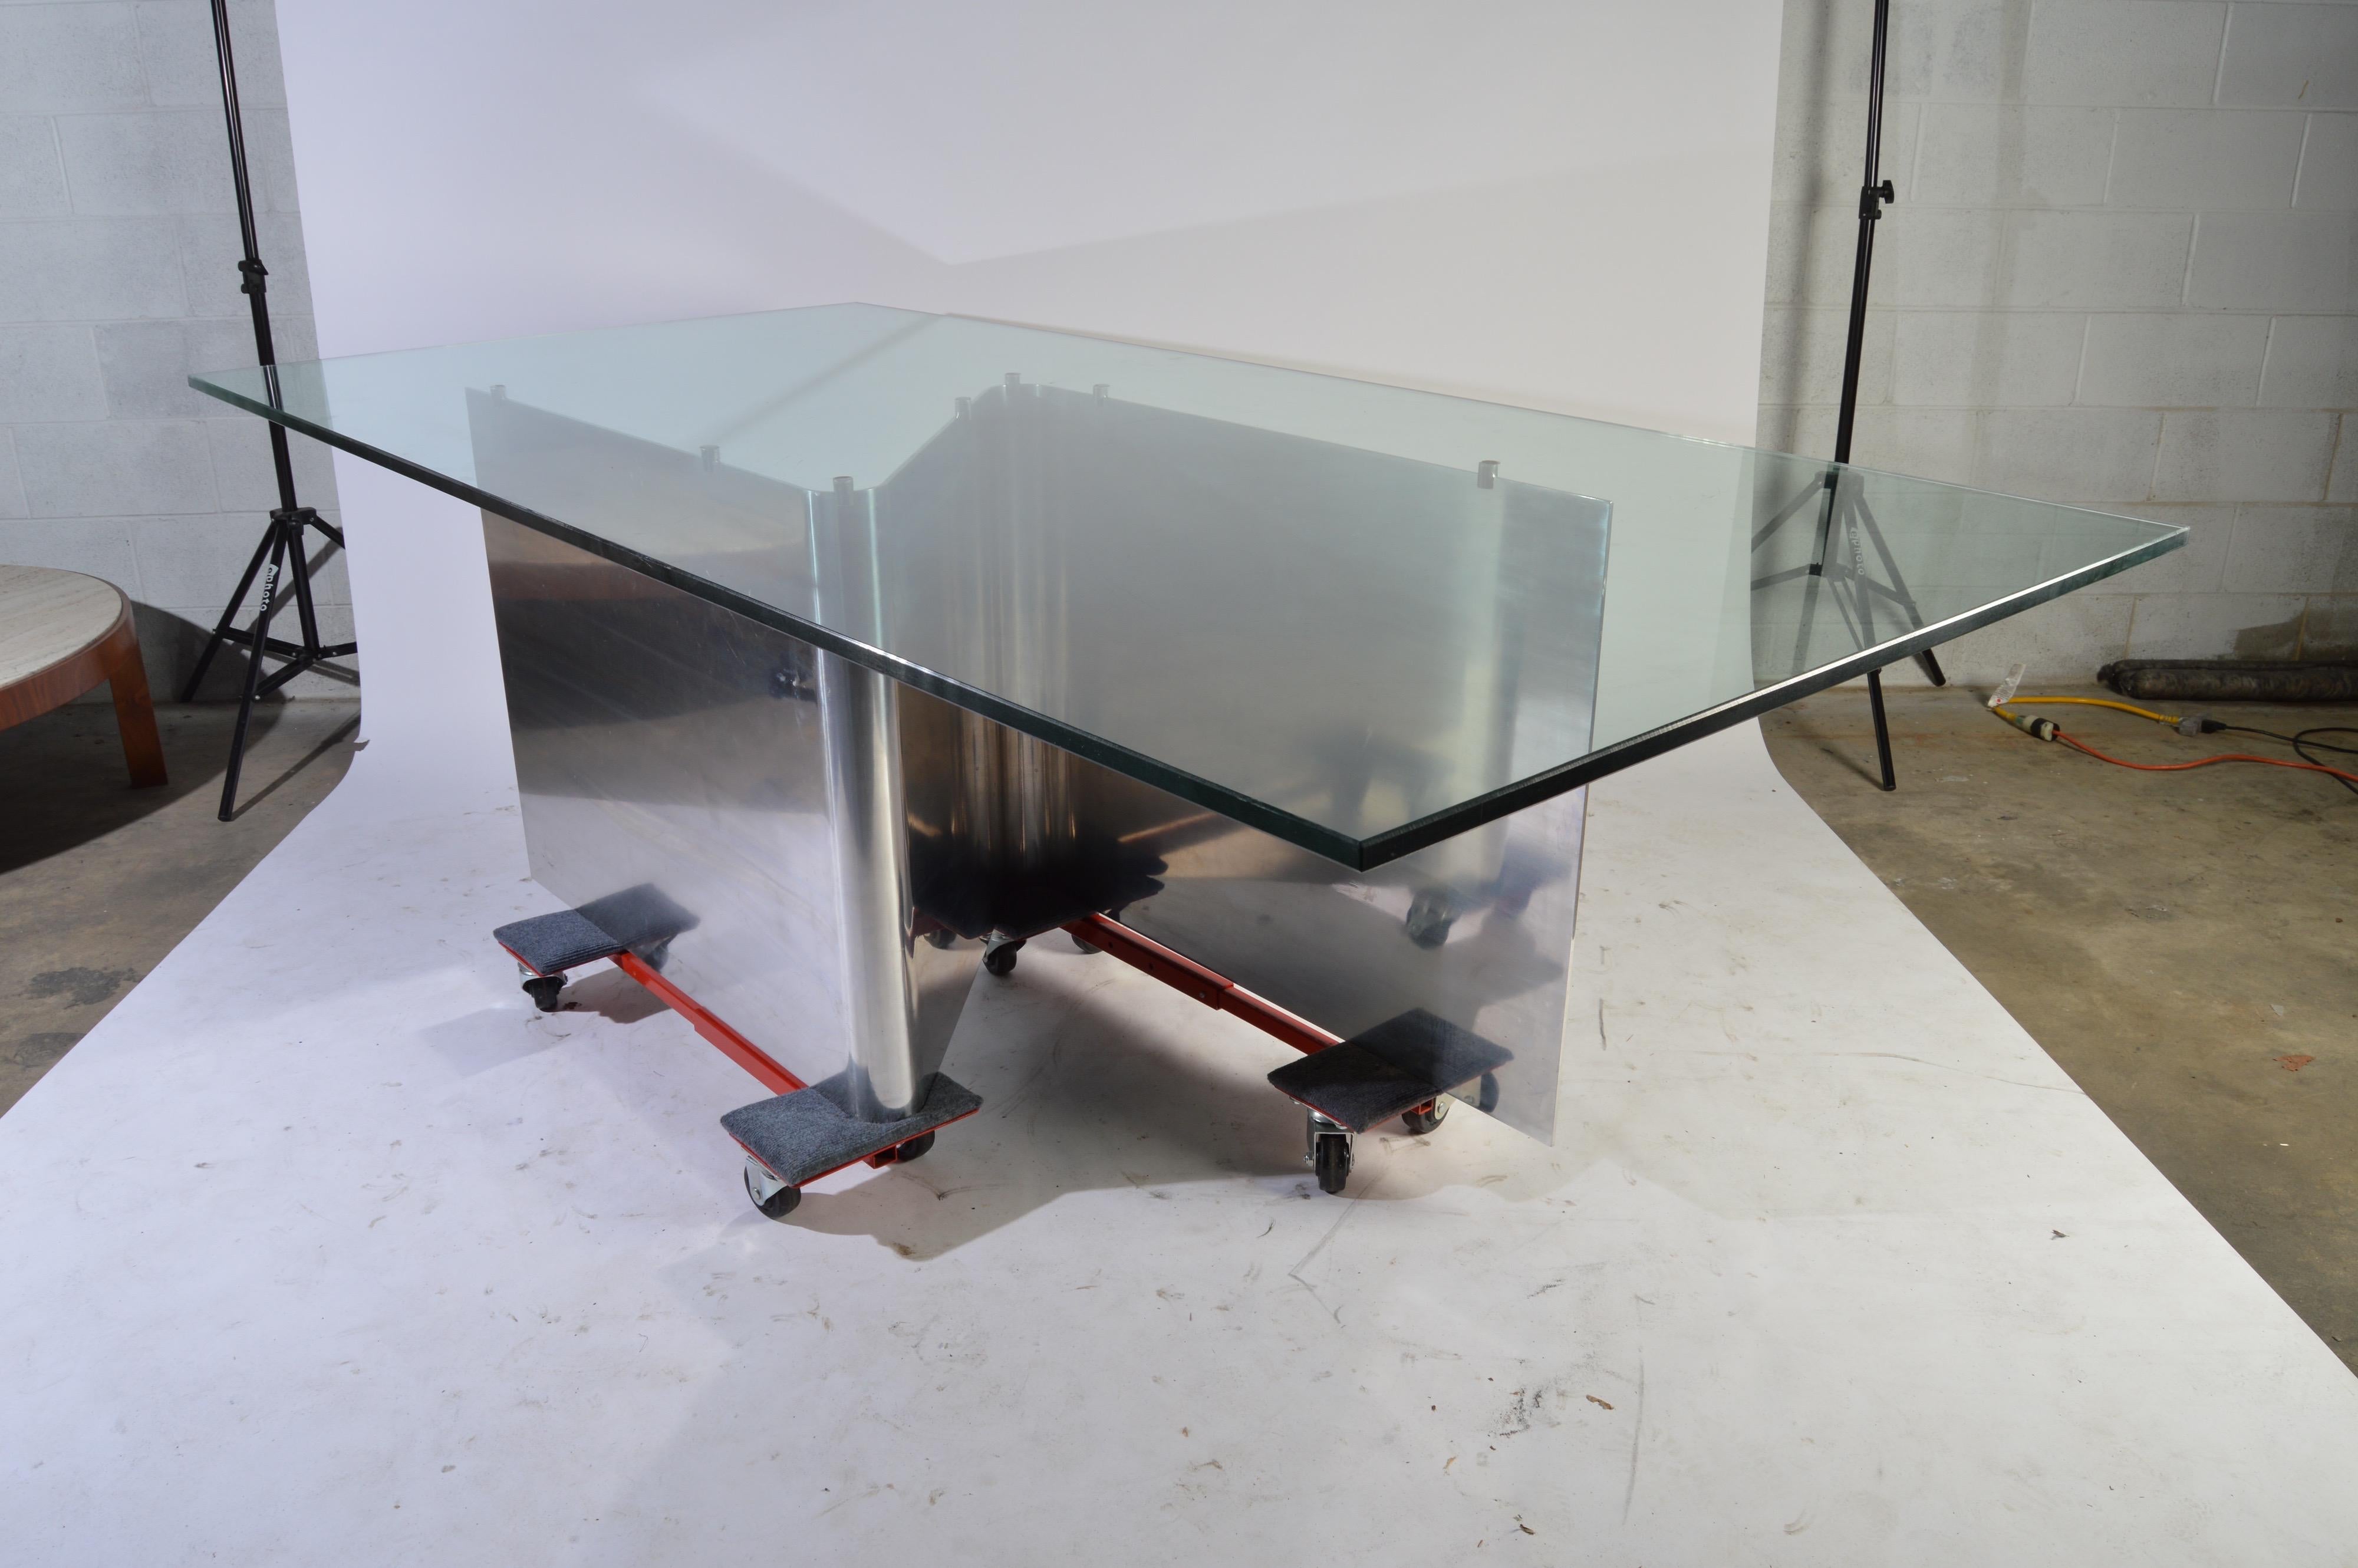 A stunning sculptural steel dining table with 1/2” thick glass top after master designer Ron Seff, circa 1970. Contemporary elegance at its best. 
Outstanding overall condition having one tiny edge chip to glass as pointed out in image provided.